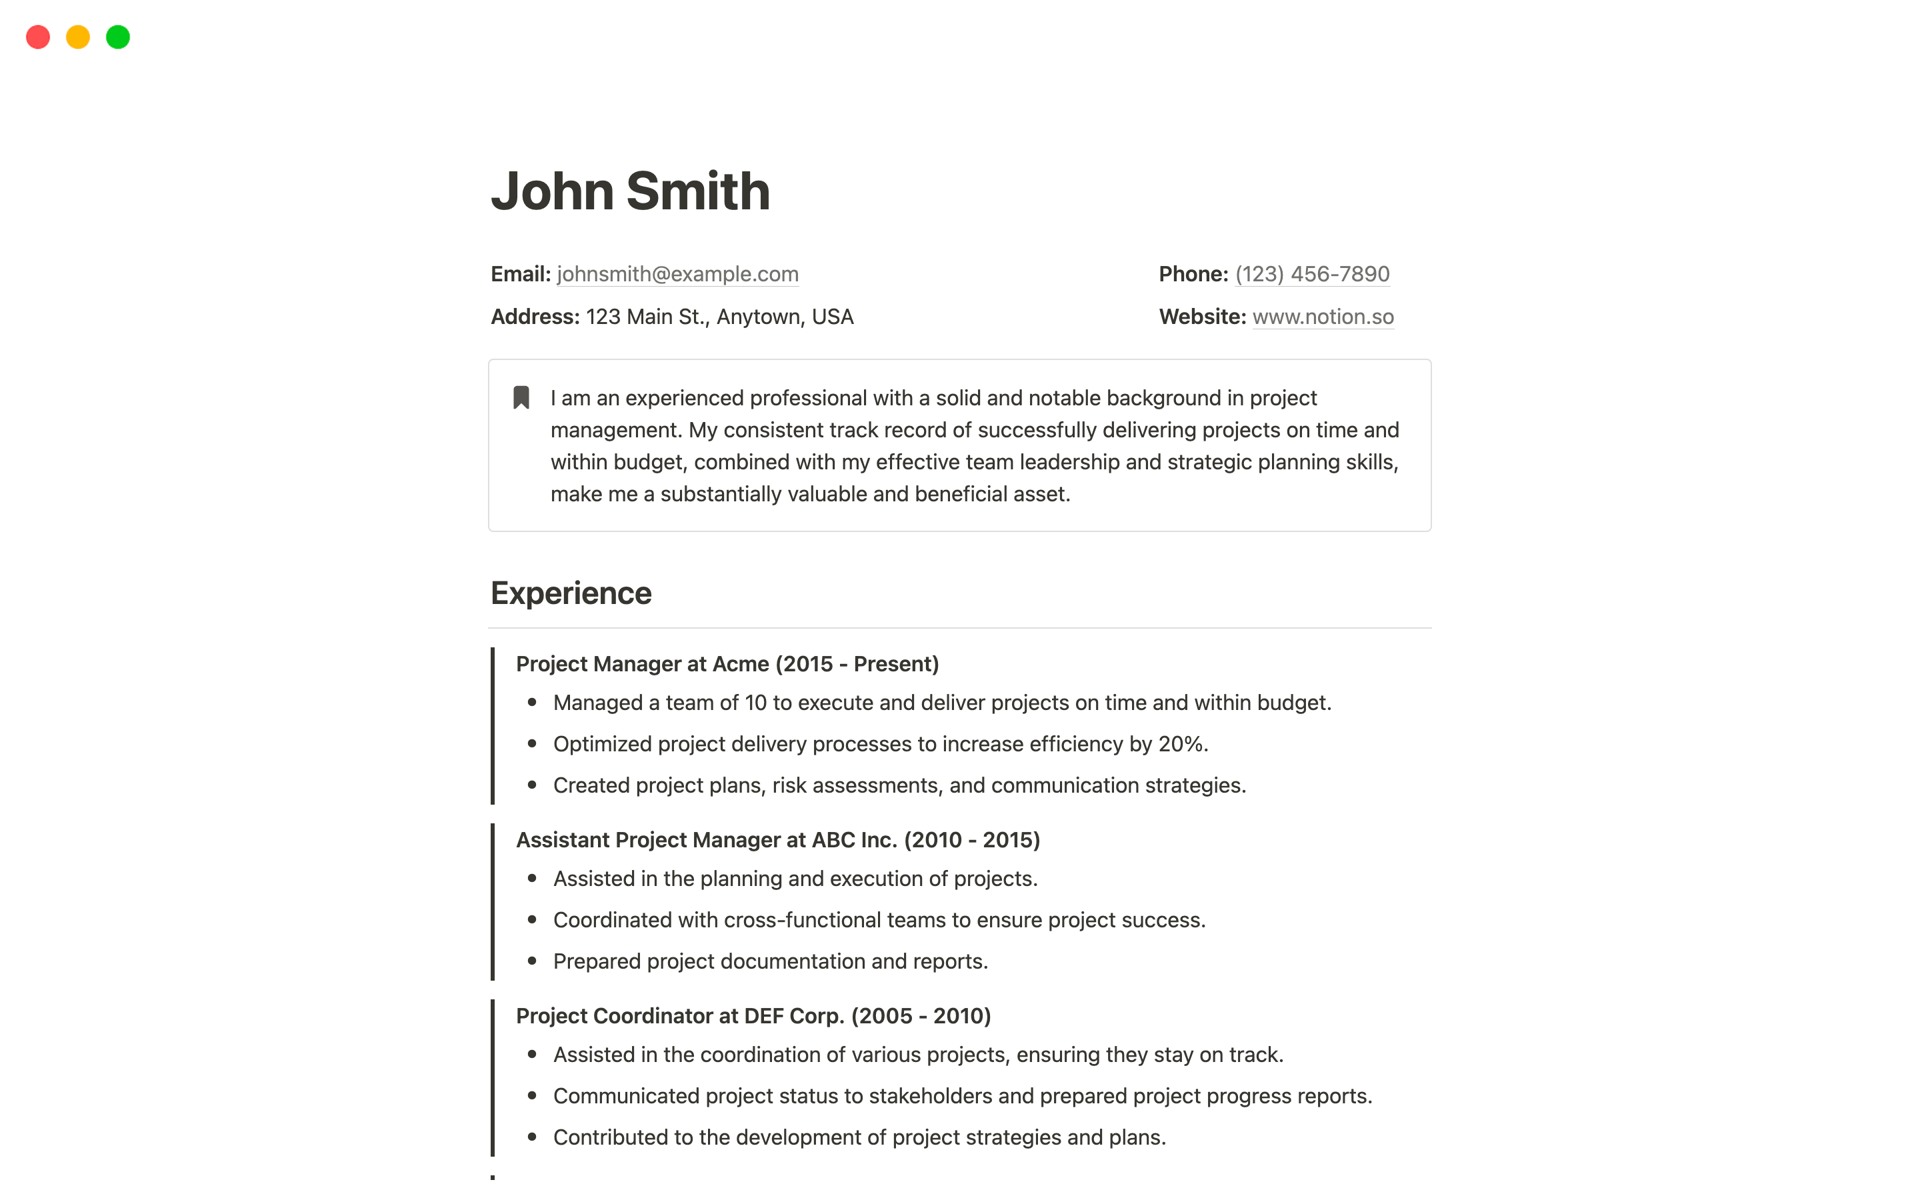 Elevate your resume with this Notion template, designed for clarity and impact, showcasing your experience and skills efficiently.